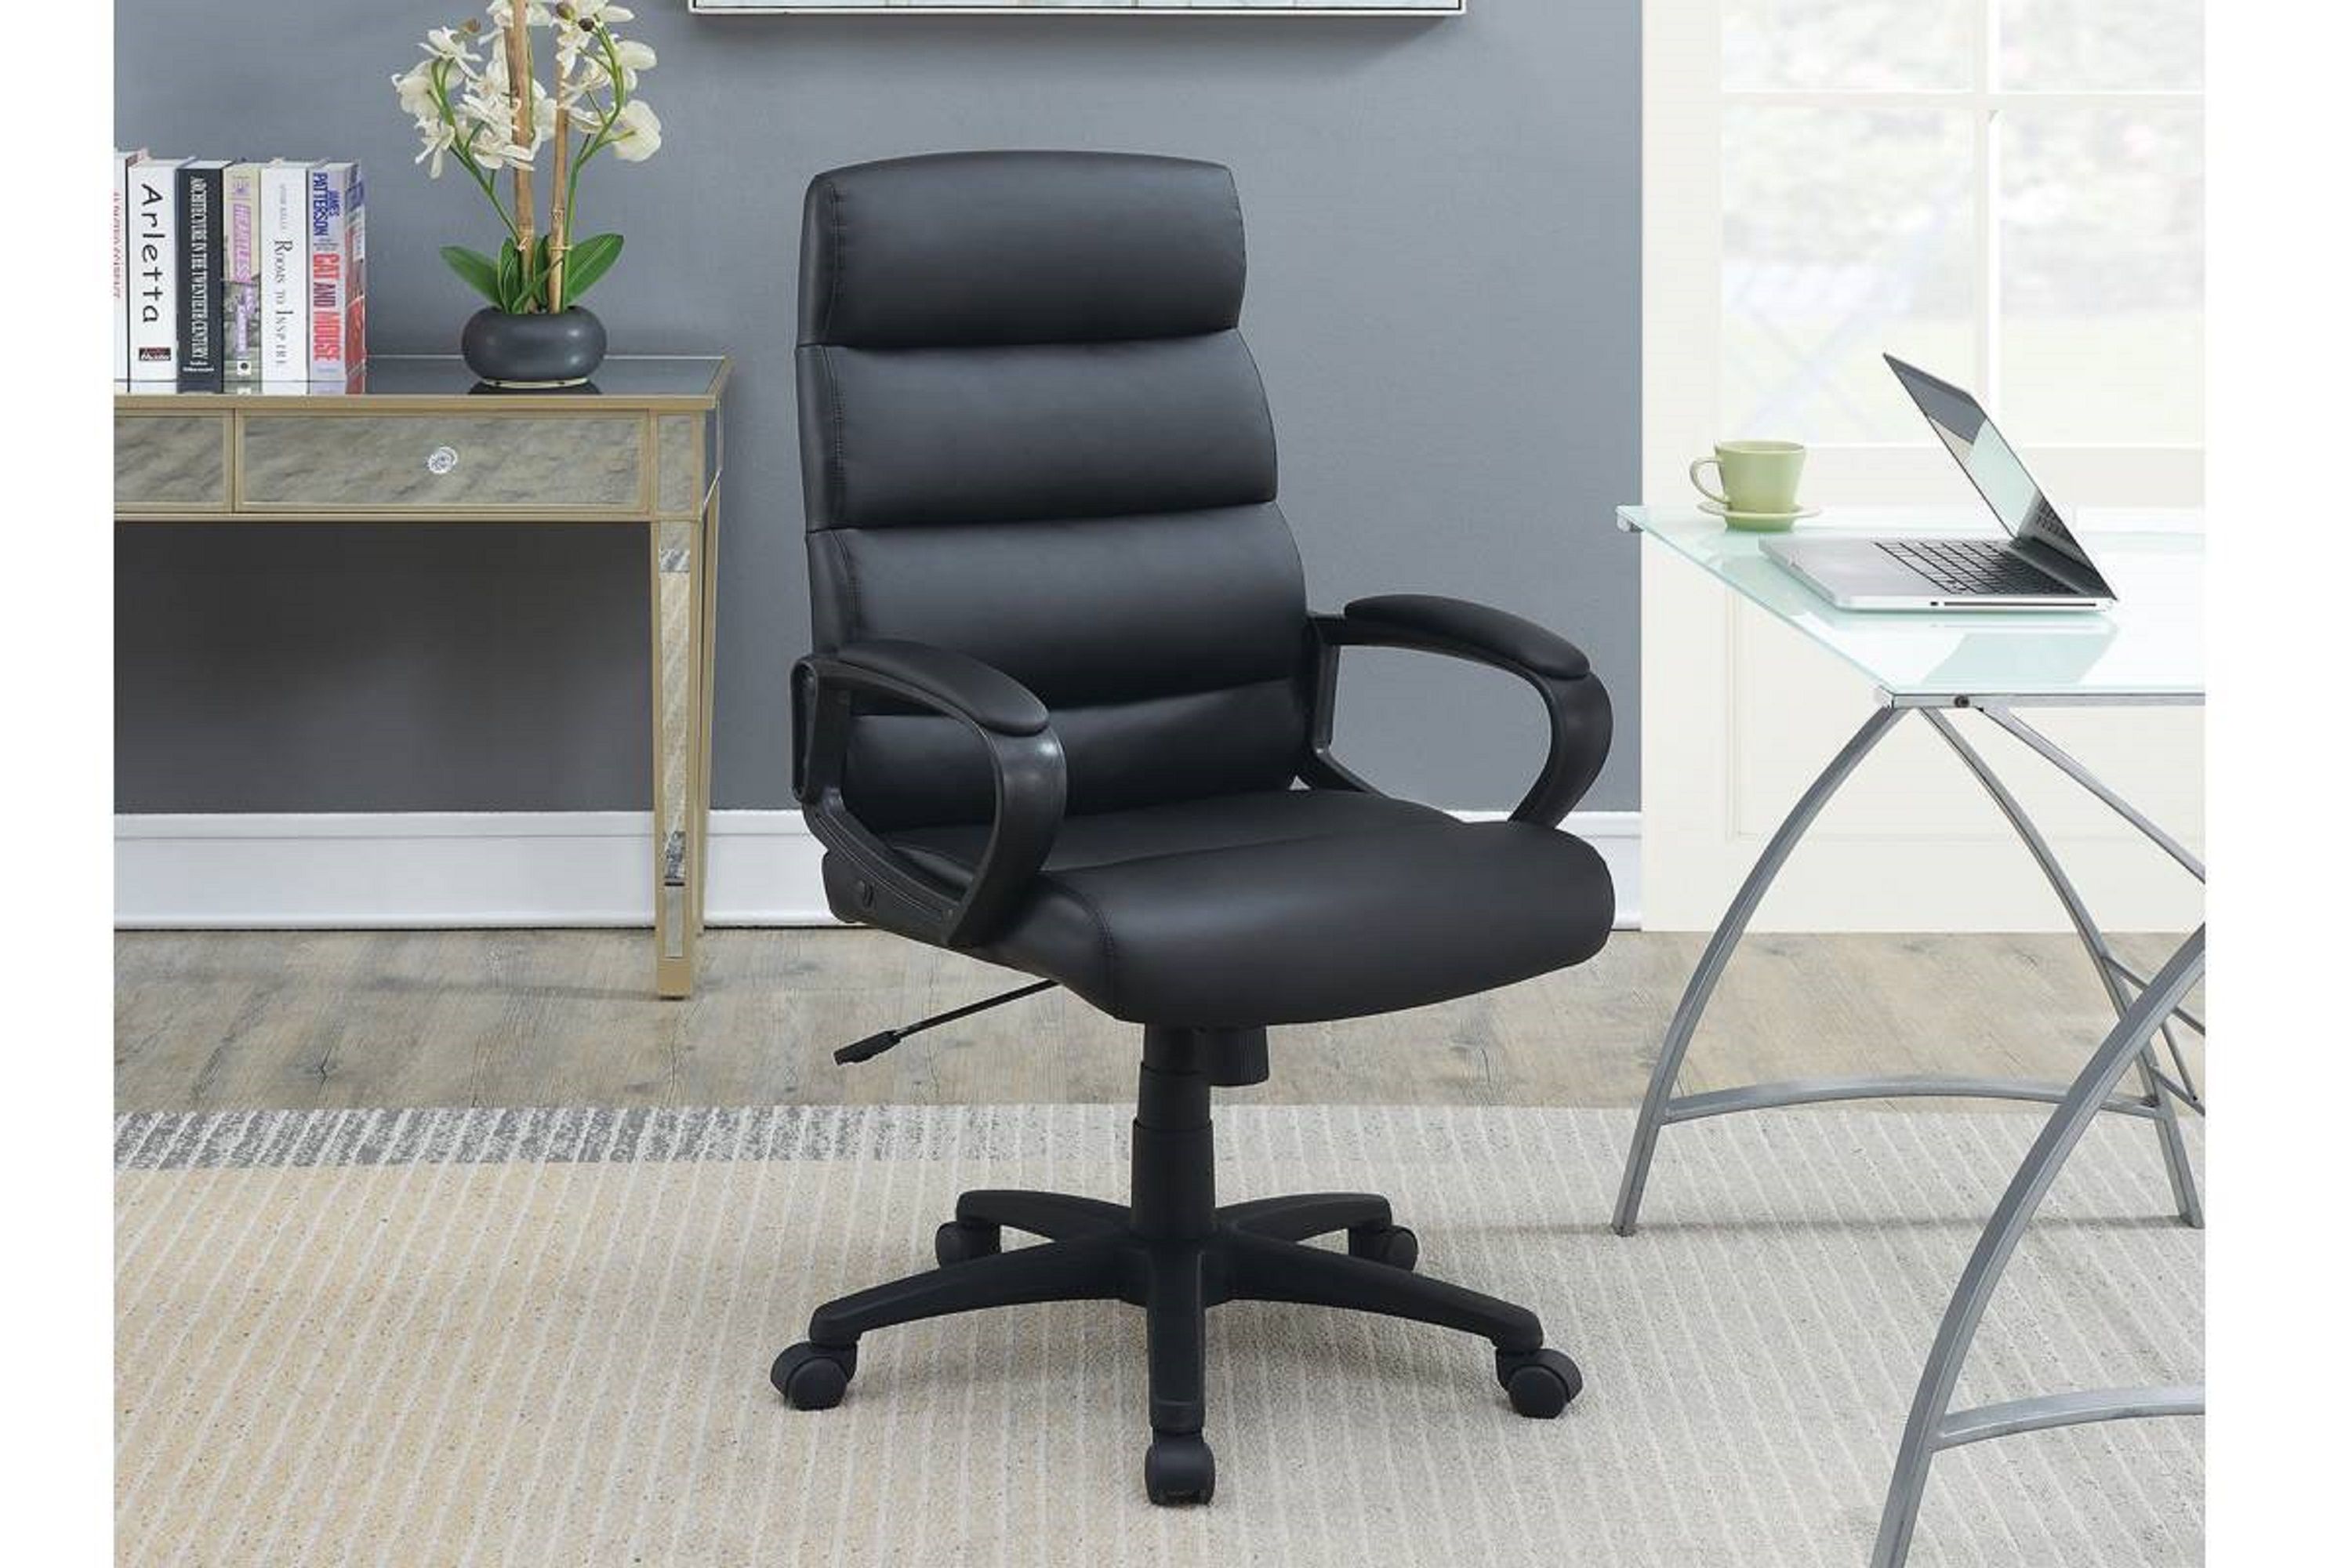 Black Faux leather Cushioned Upholstered 1pc Office Chair Adjustable Height Desk Chair Relax-Boyel Living